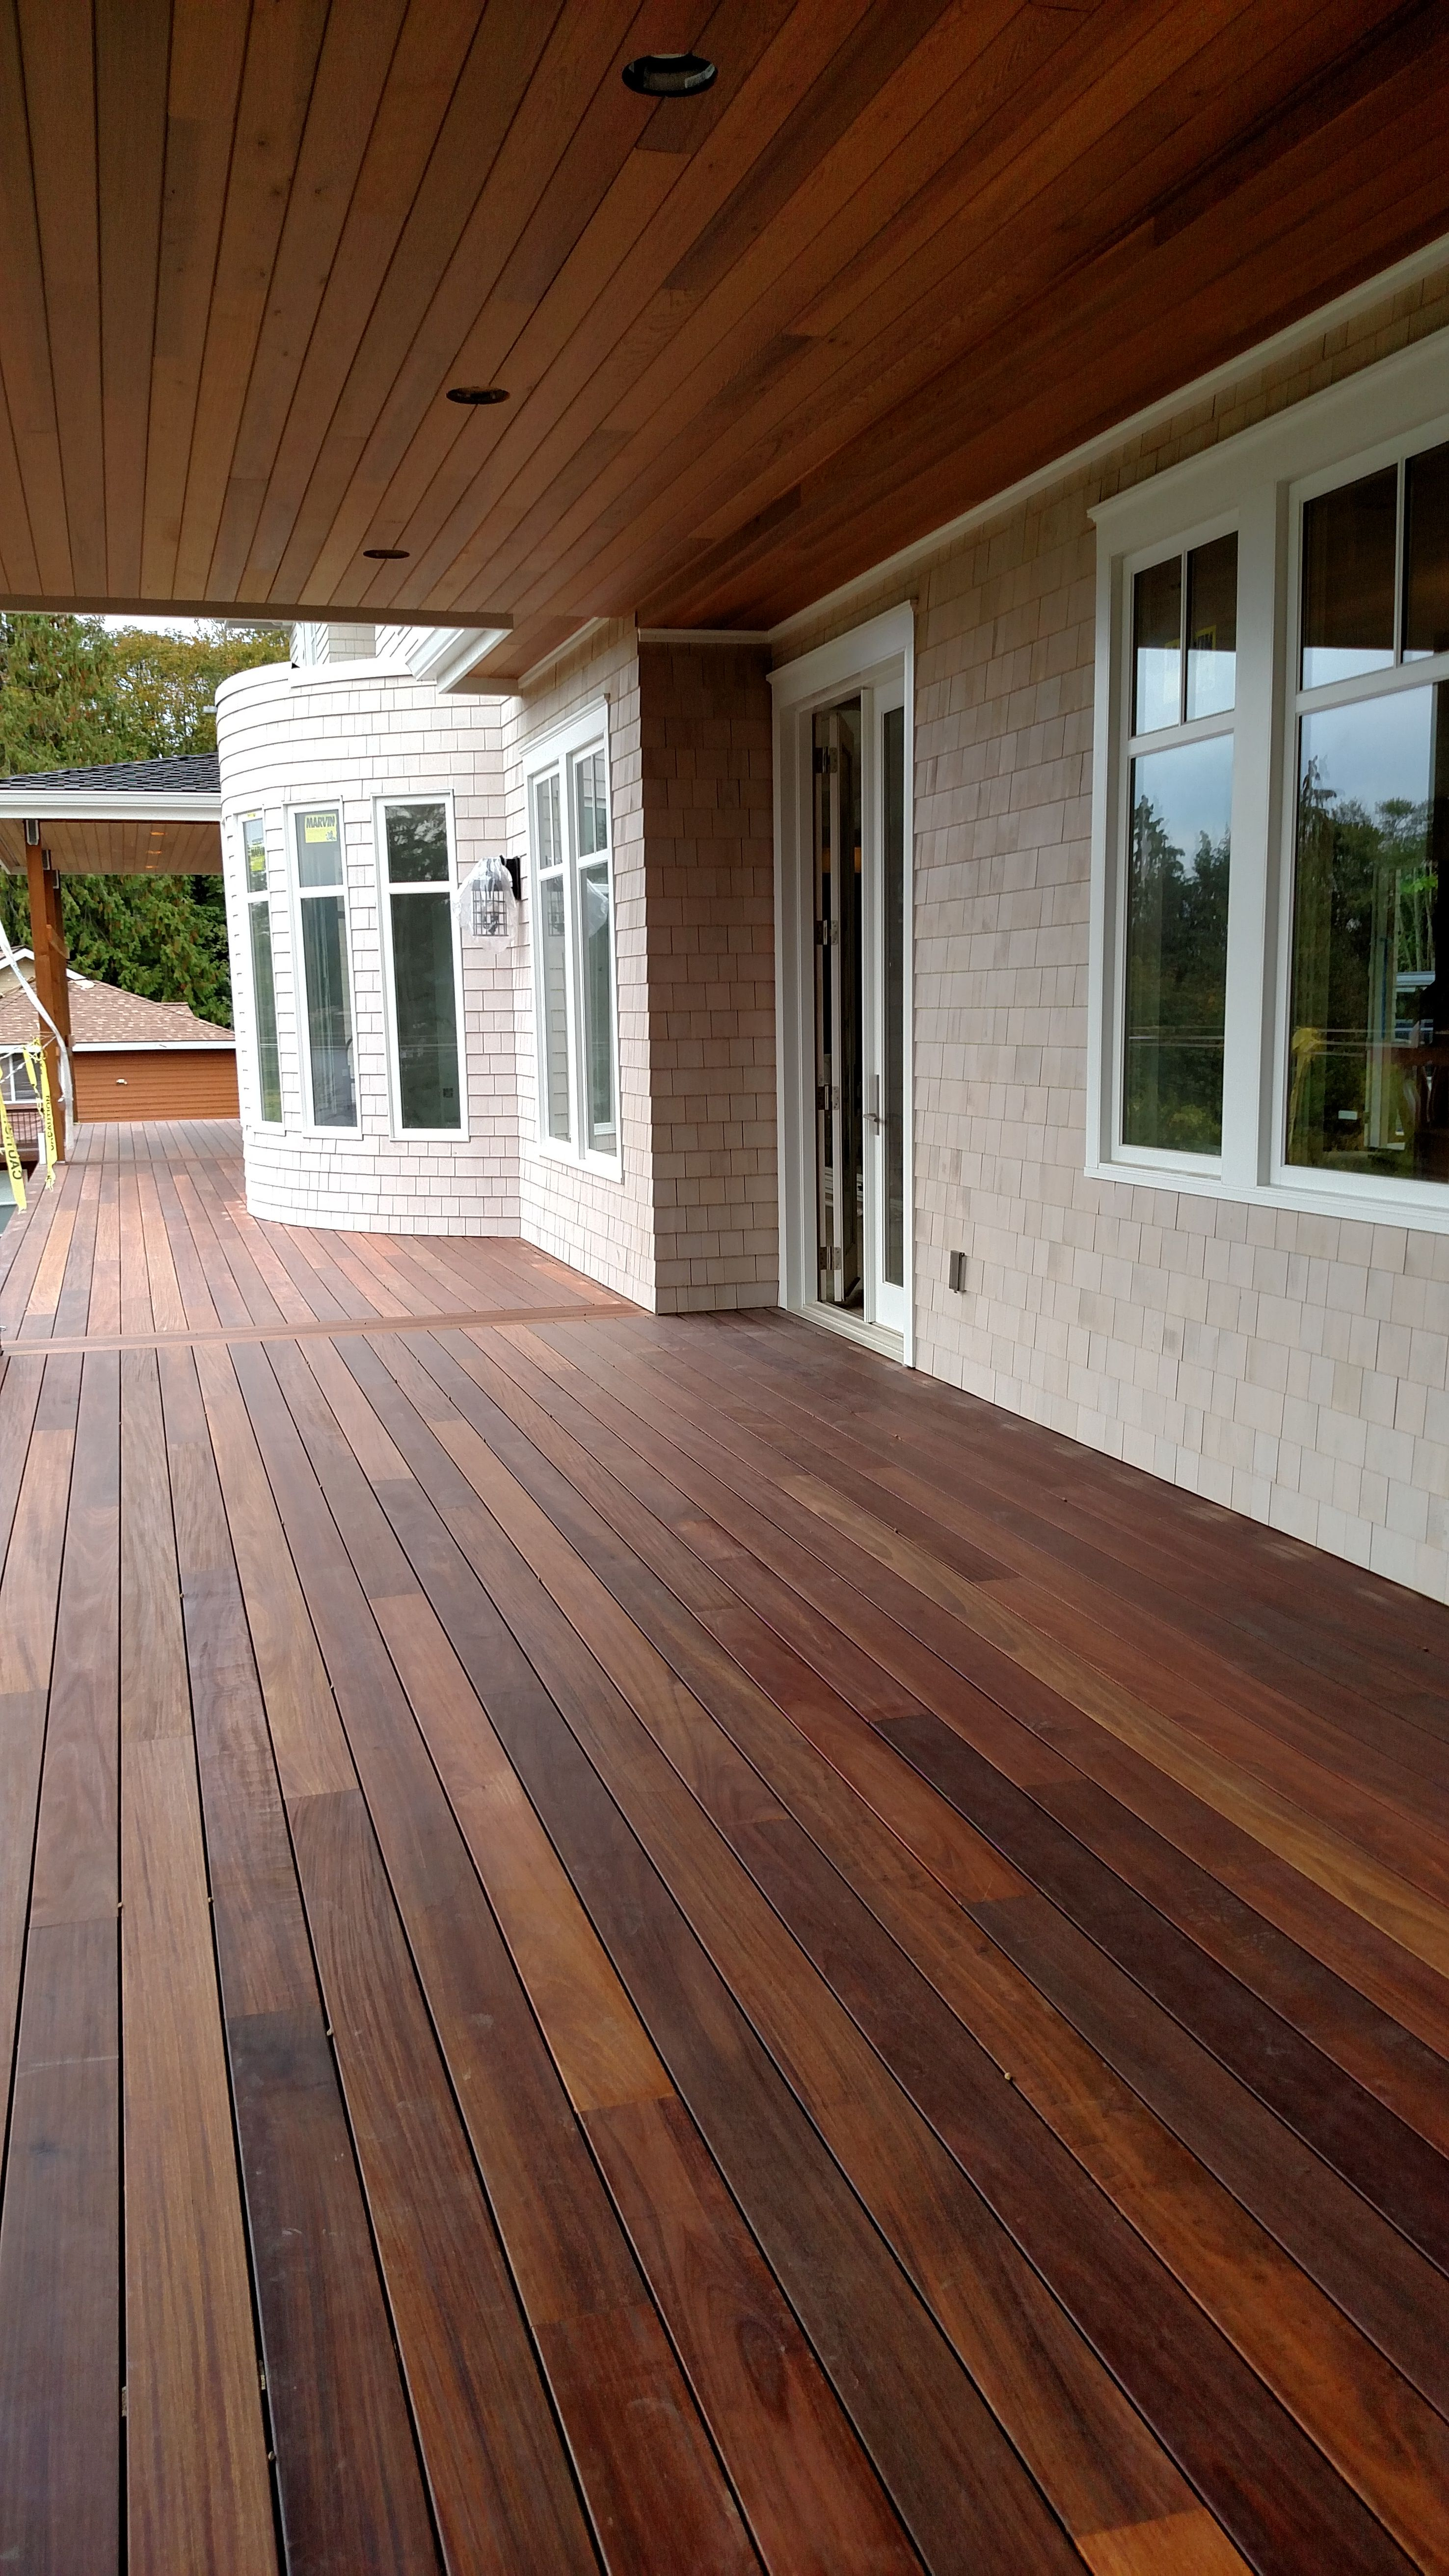 Mahogany Decking Applied With Penofin Exotic Hardwood Exterior Stain in sizing 2952 X 5248